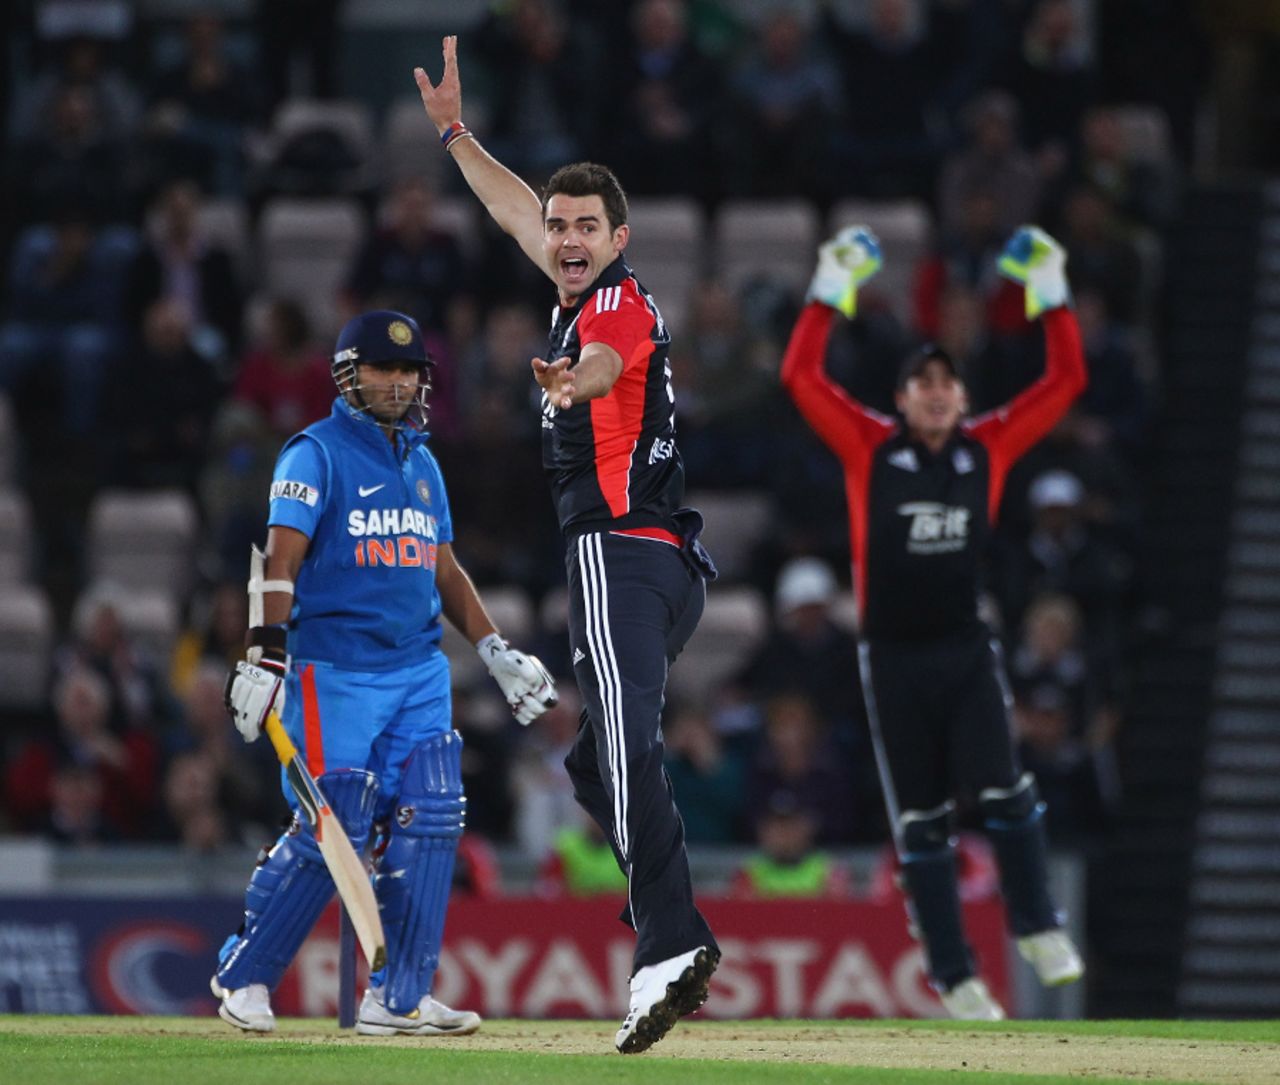 James Anderson appeals successfully for Parthiv Patel's wicket, England v India, 2nd ODI, Rose Bowl, September 6 2011